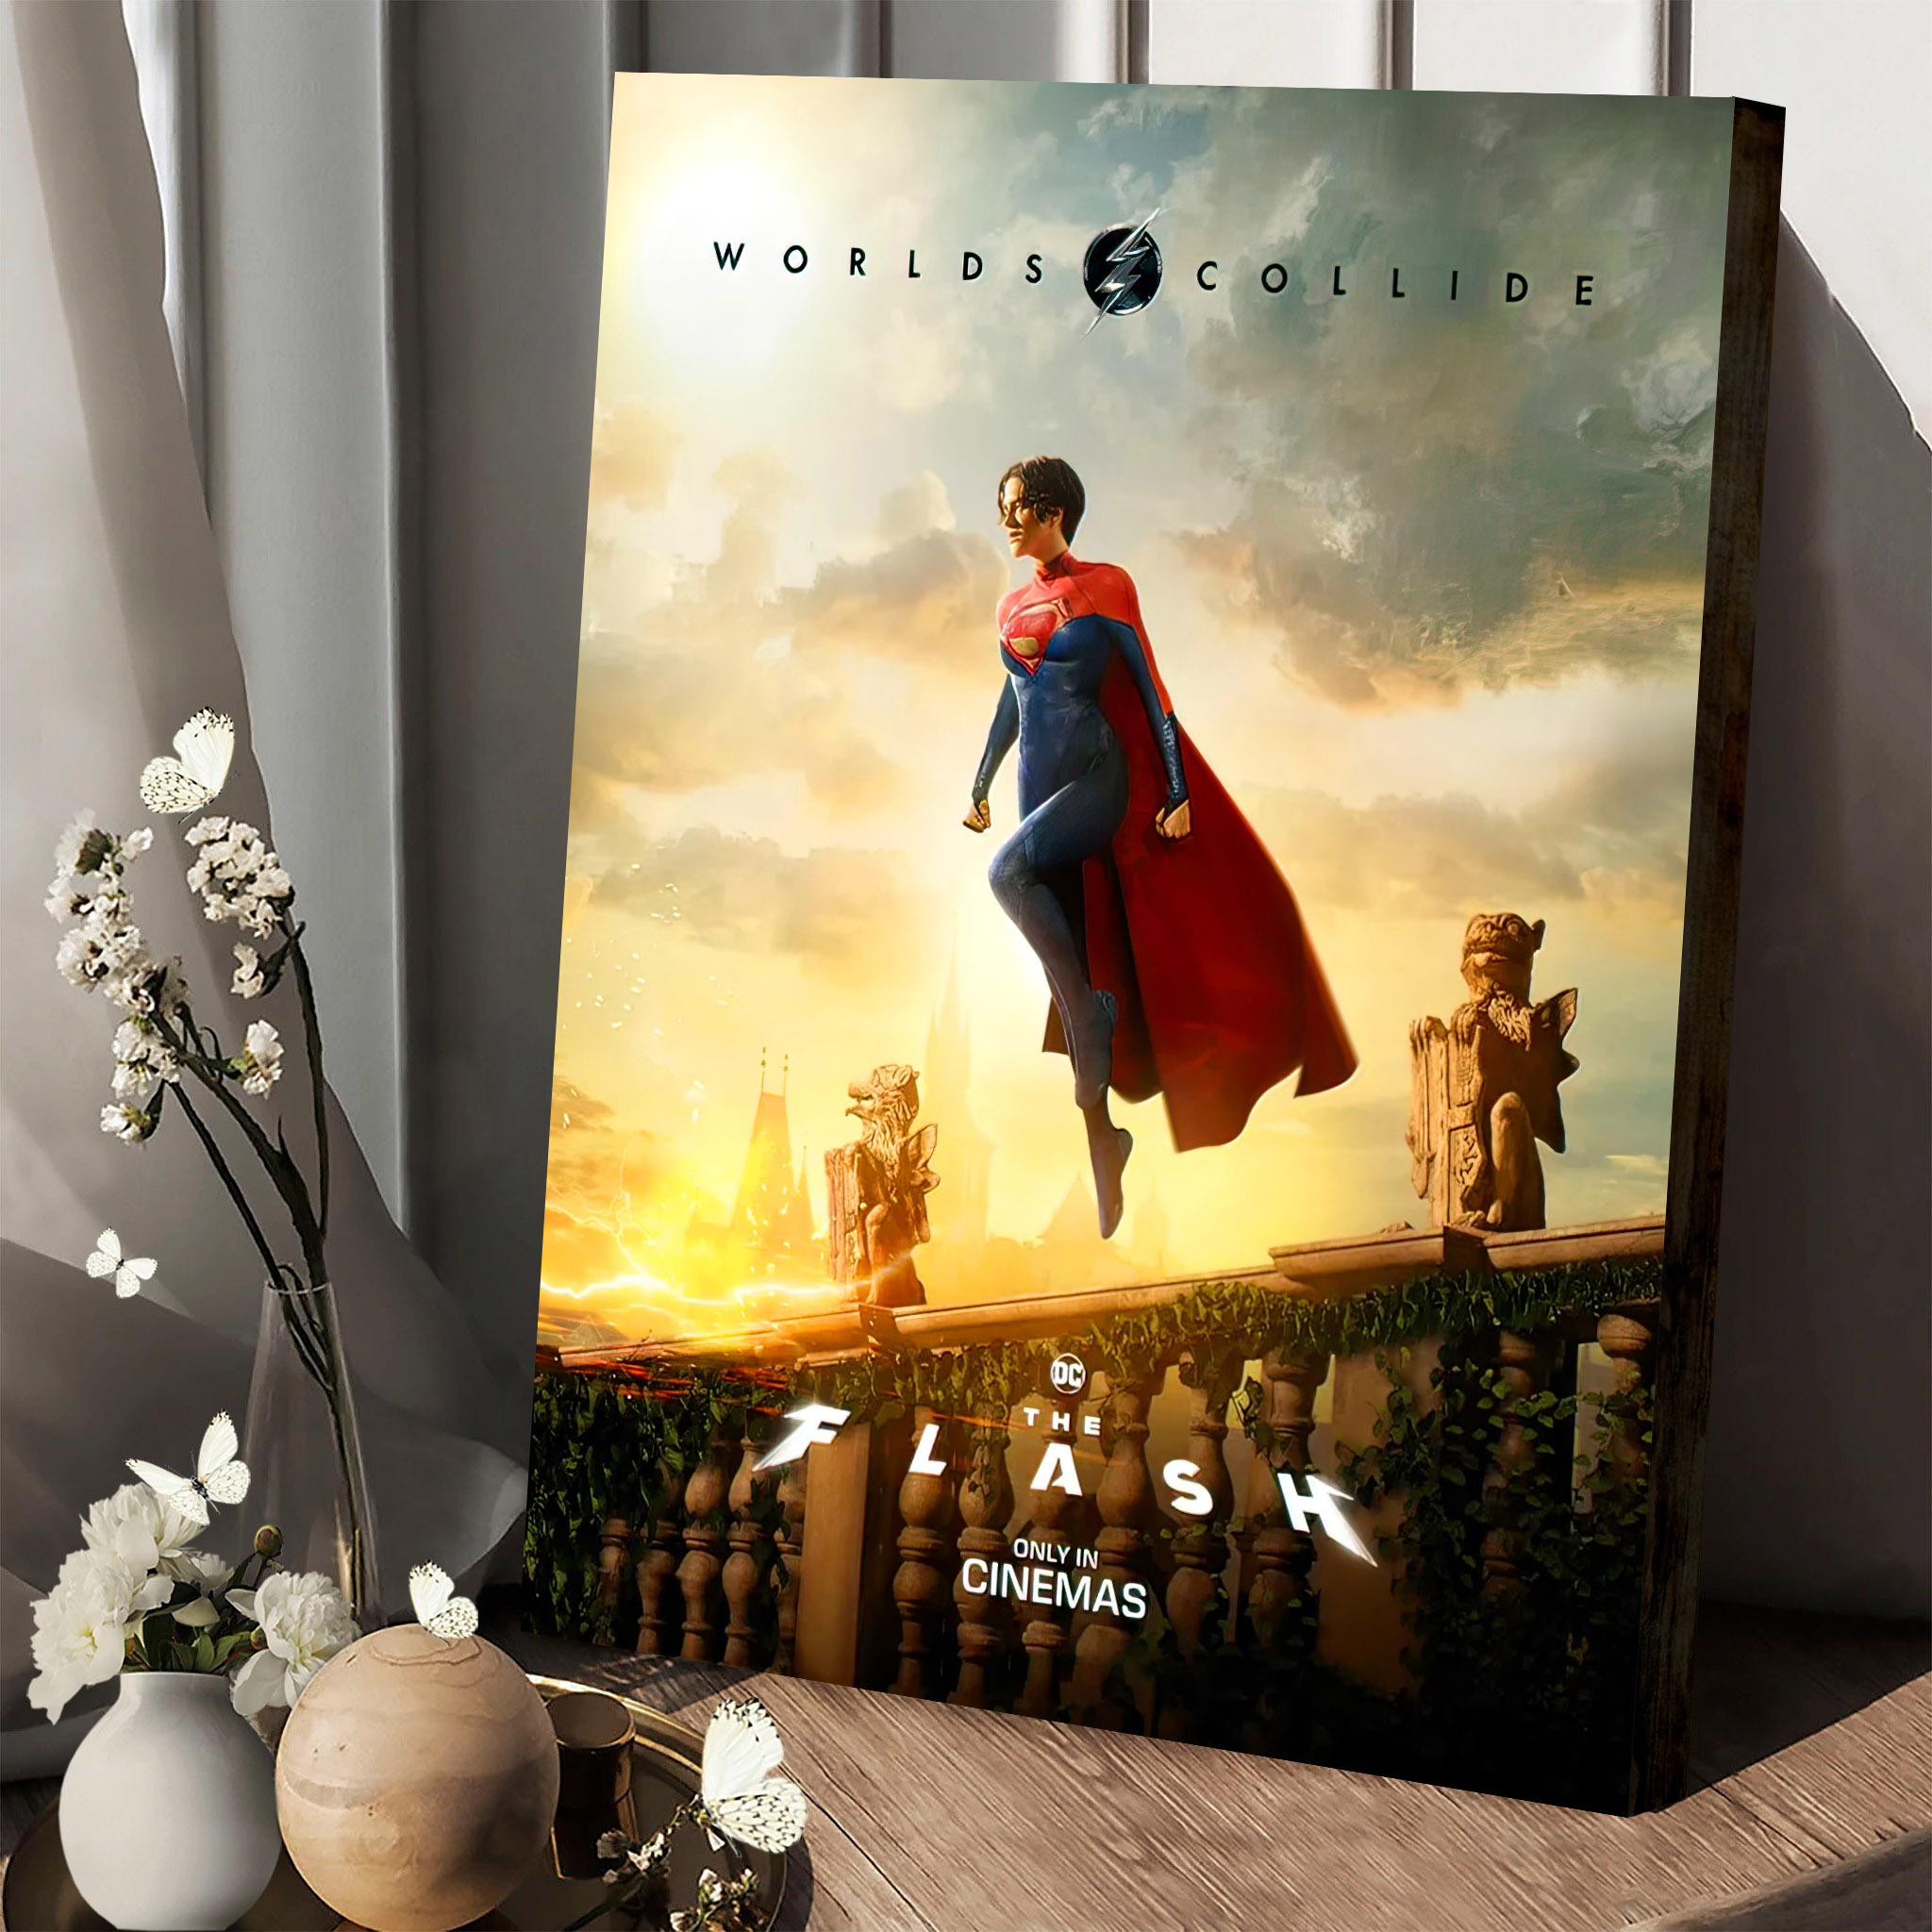 New Supergirl Poster For The Flash Movie Canvas Tkg0jc